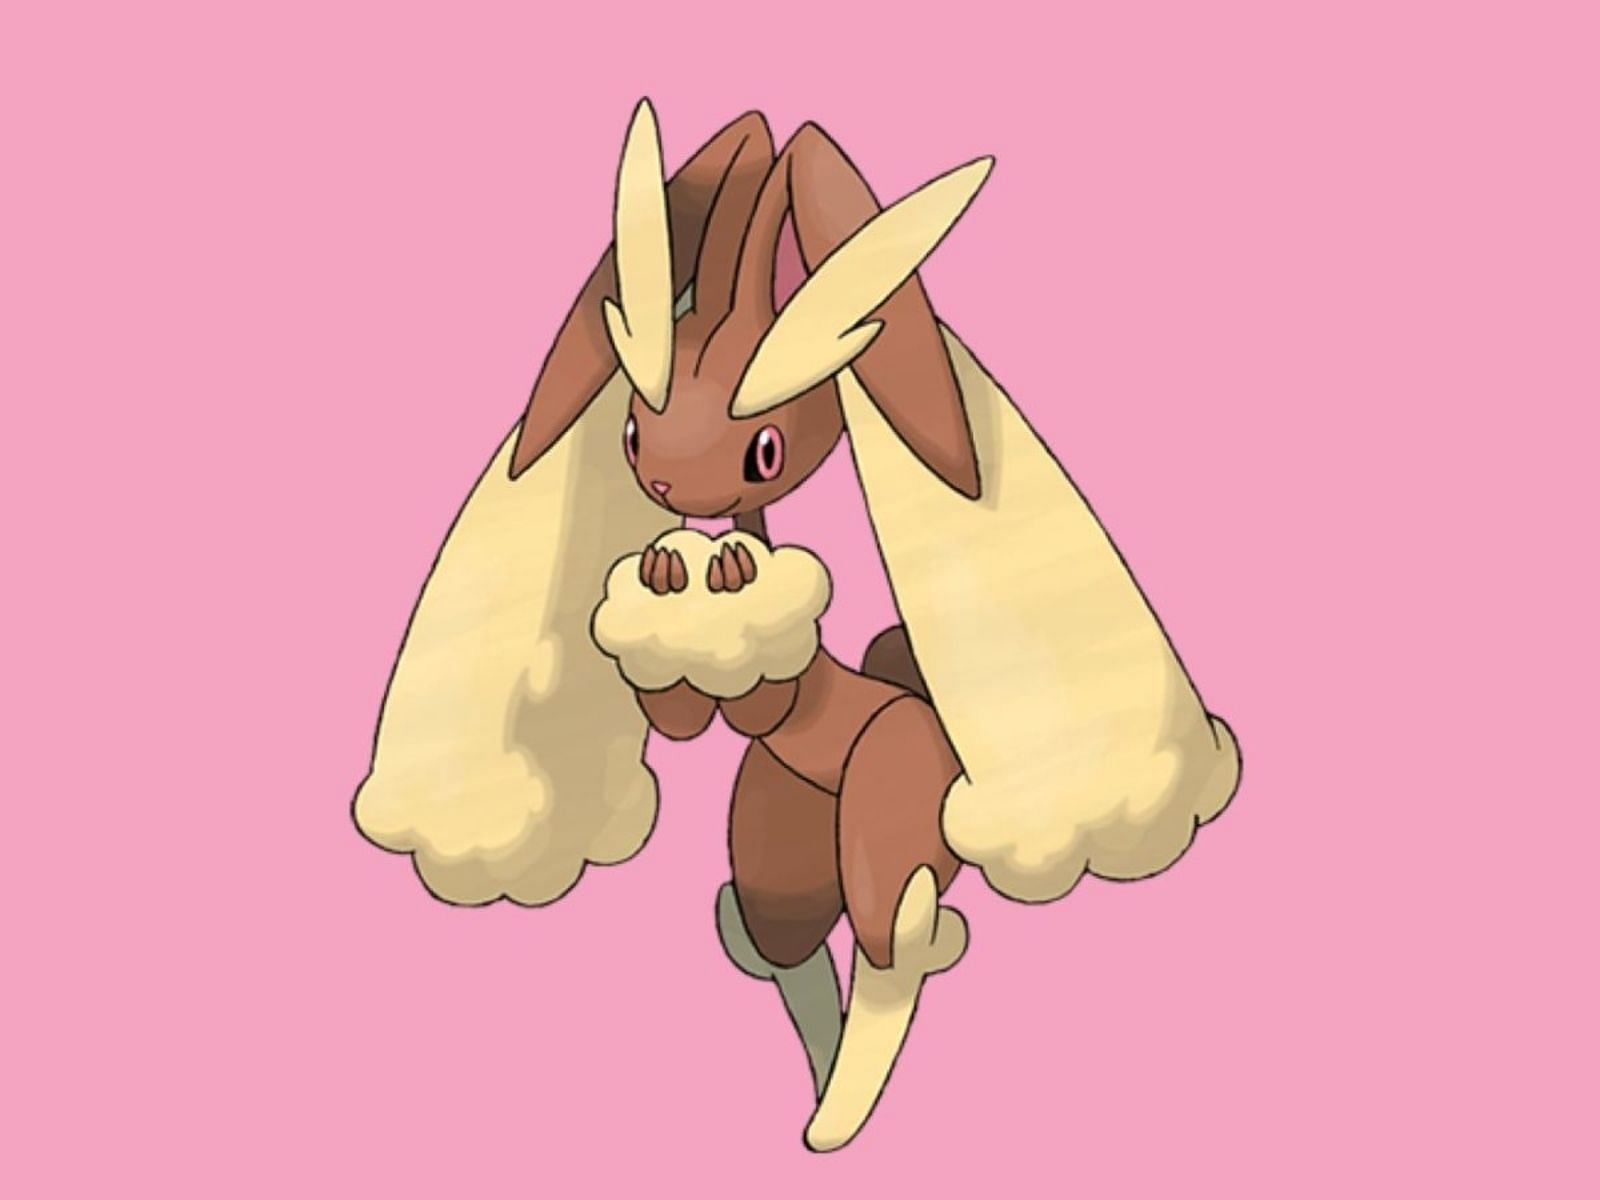 Lopunny is a Normal-type Pokemon, leaving it weak only to Fighting-type moves (Image via The Pokemon Company)